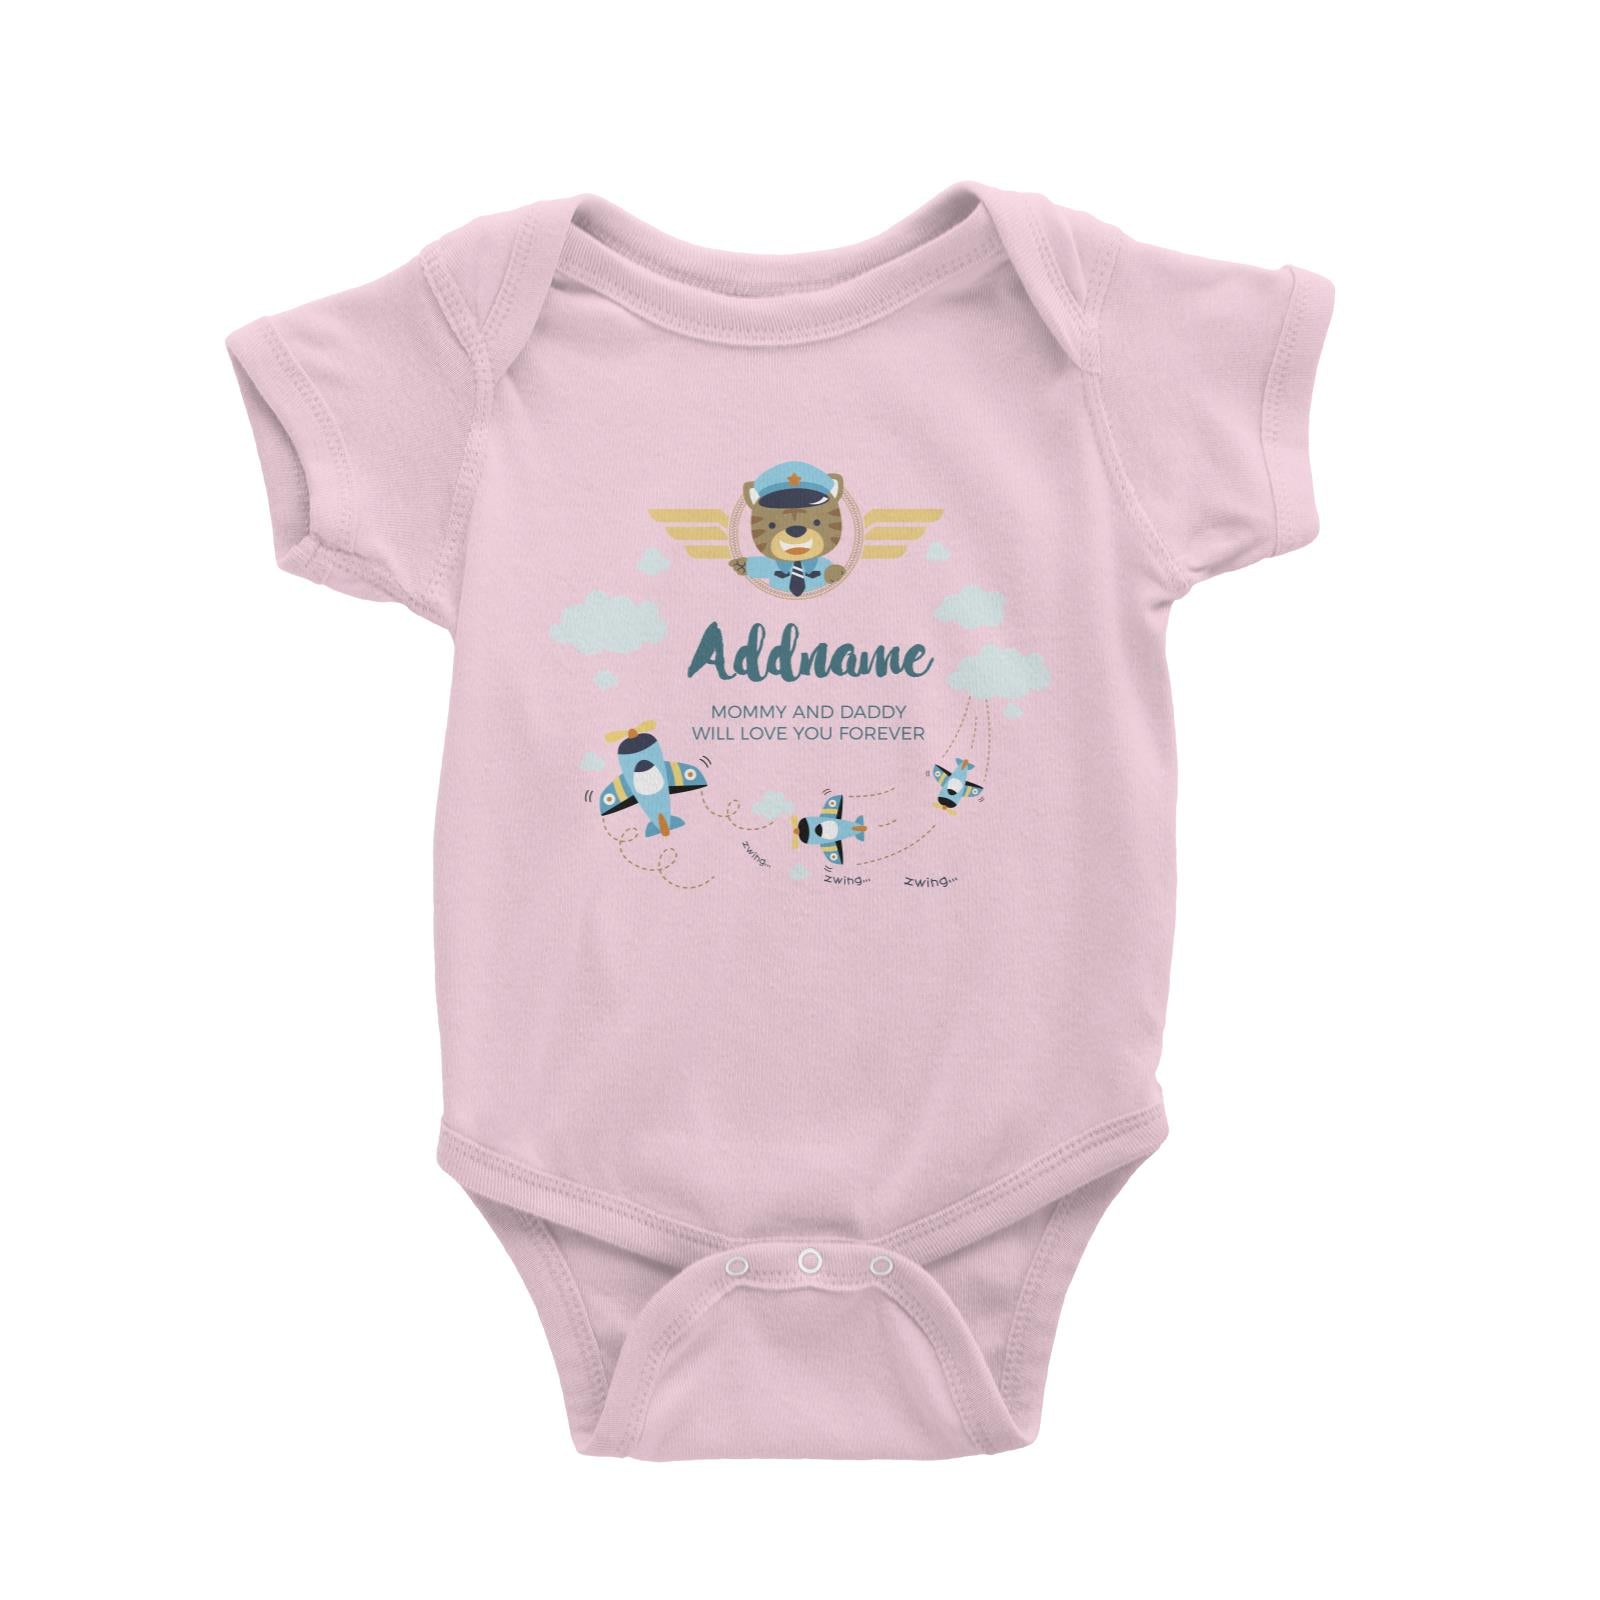 Cute Bear Pilot and Blue Planes Flying Personalizable with Name and Text Baby Romper